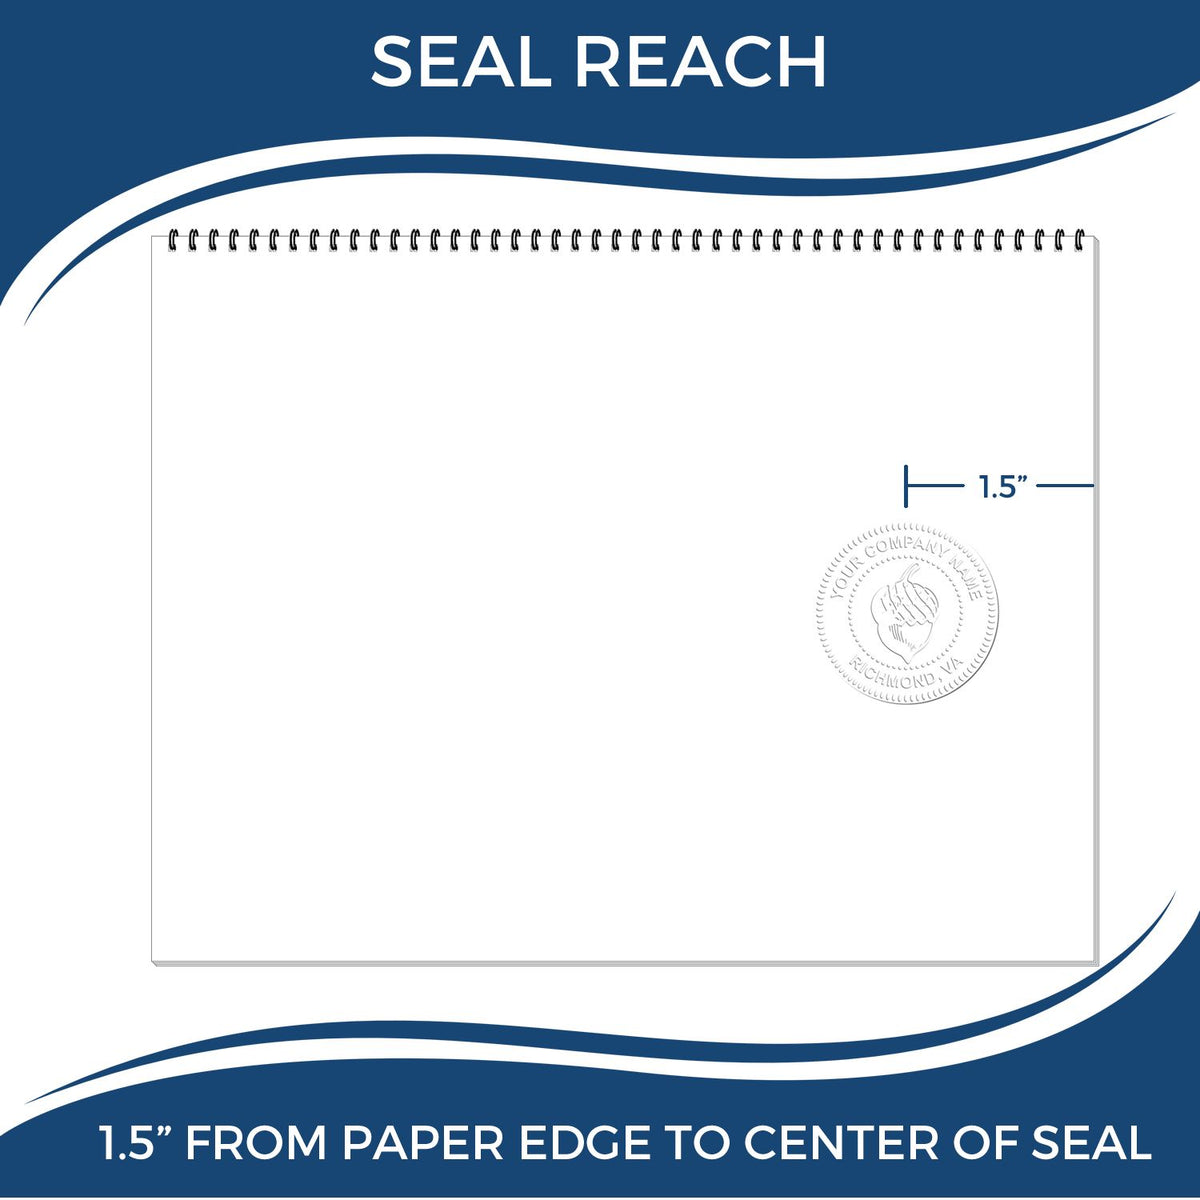 An infographic showing the seal reach which is represented by a ruler and a miniature seal image of the Kansas Engineer Desk Seal